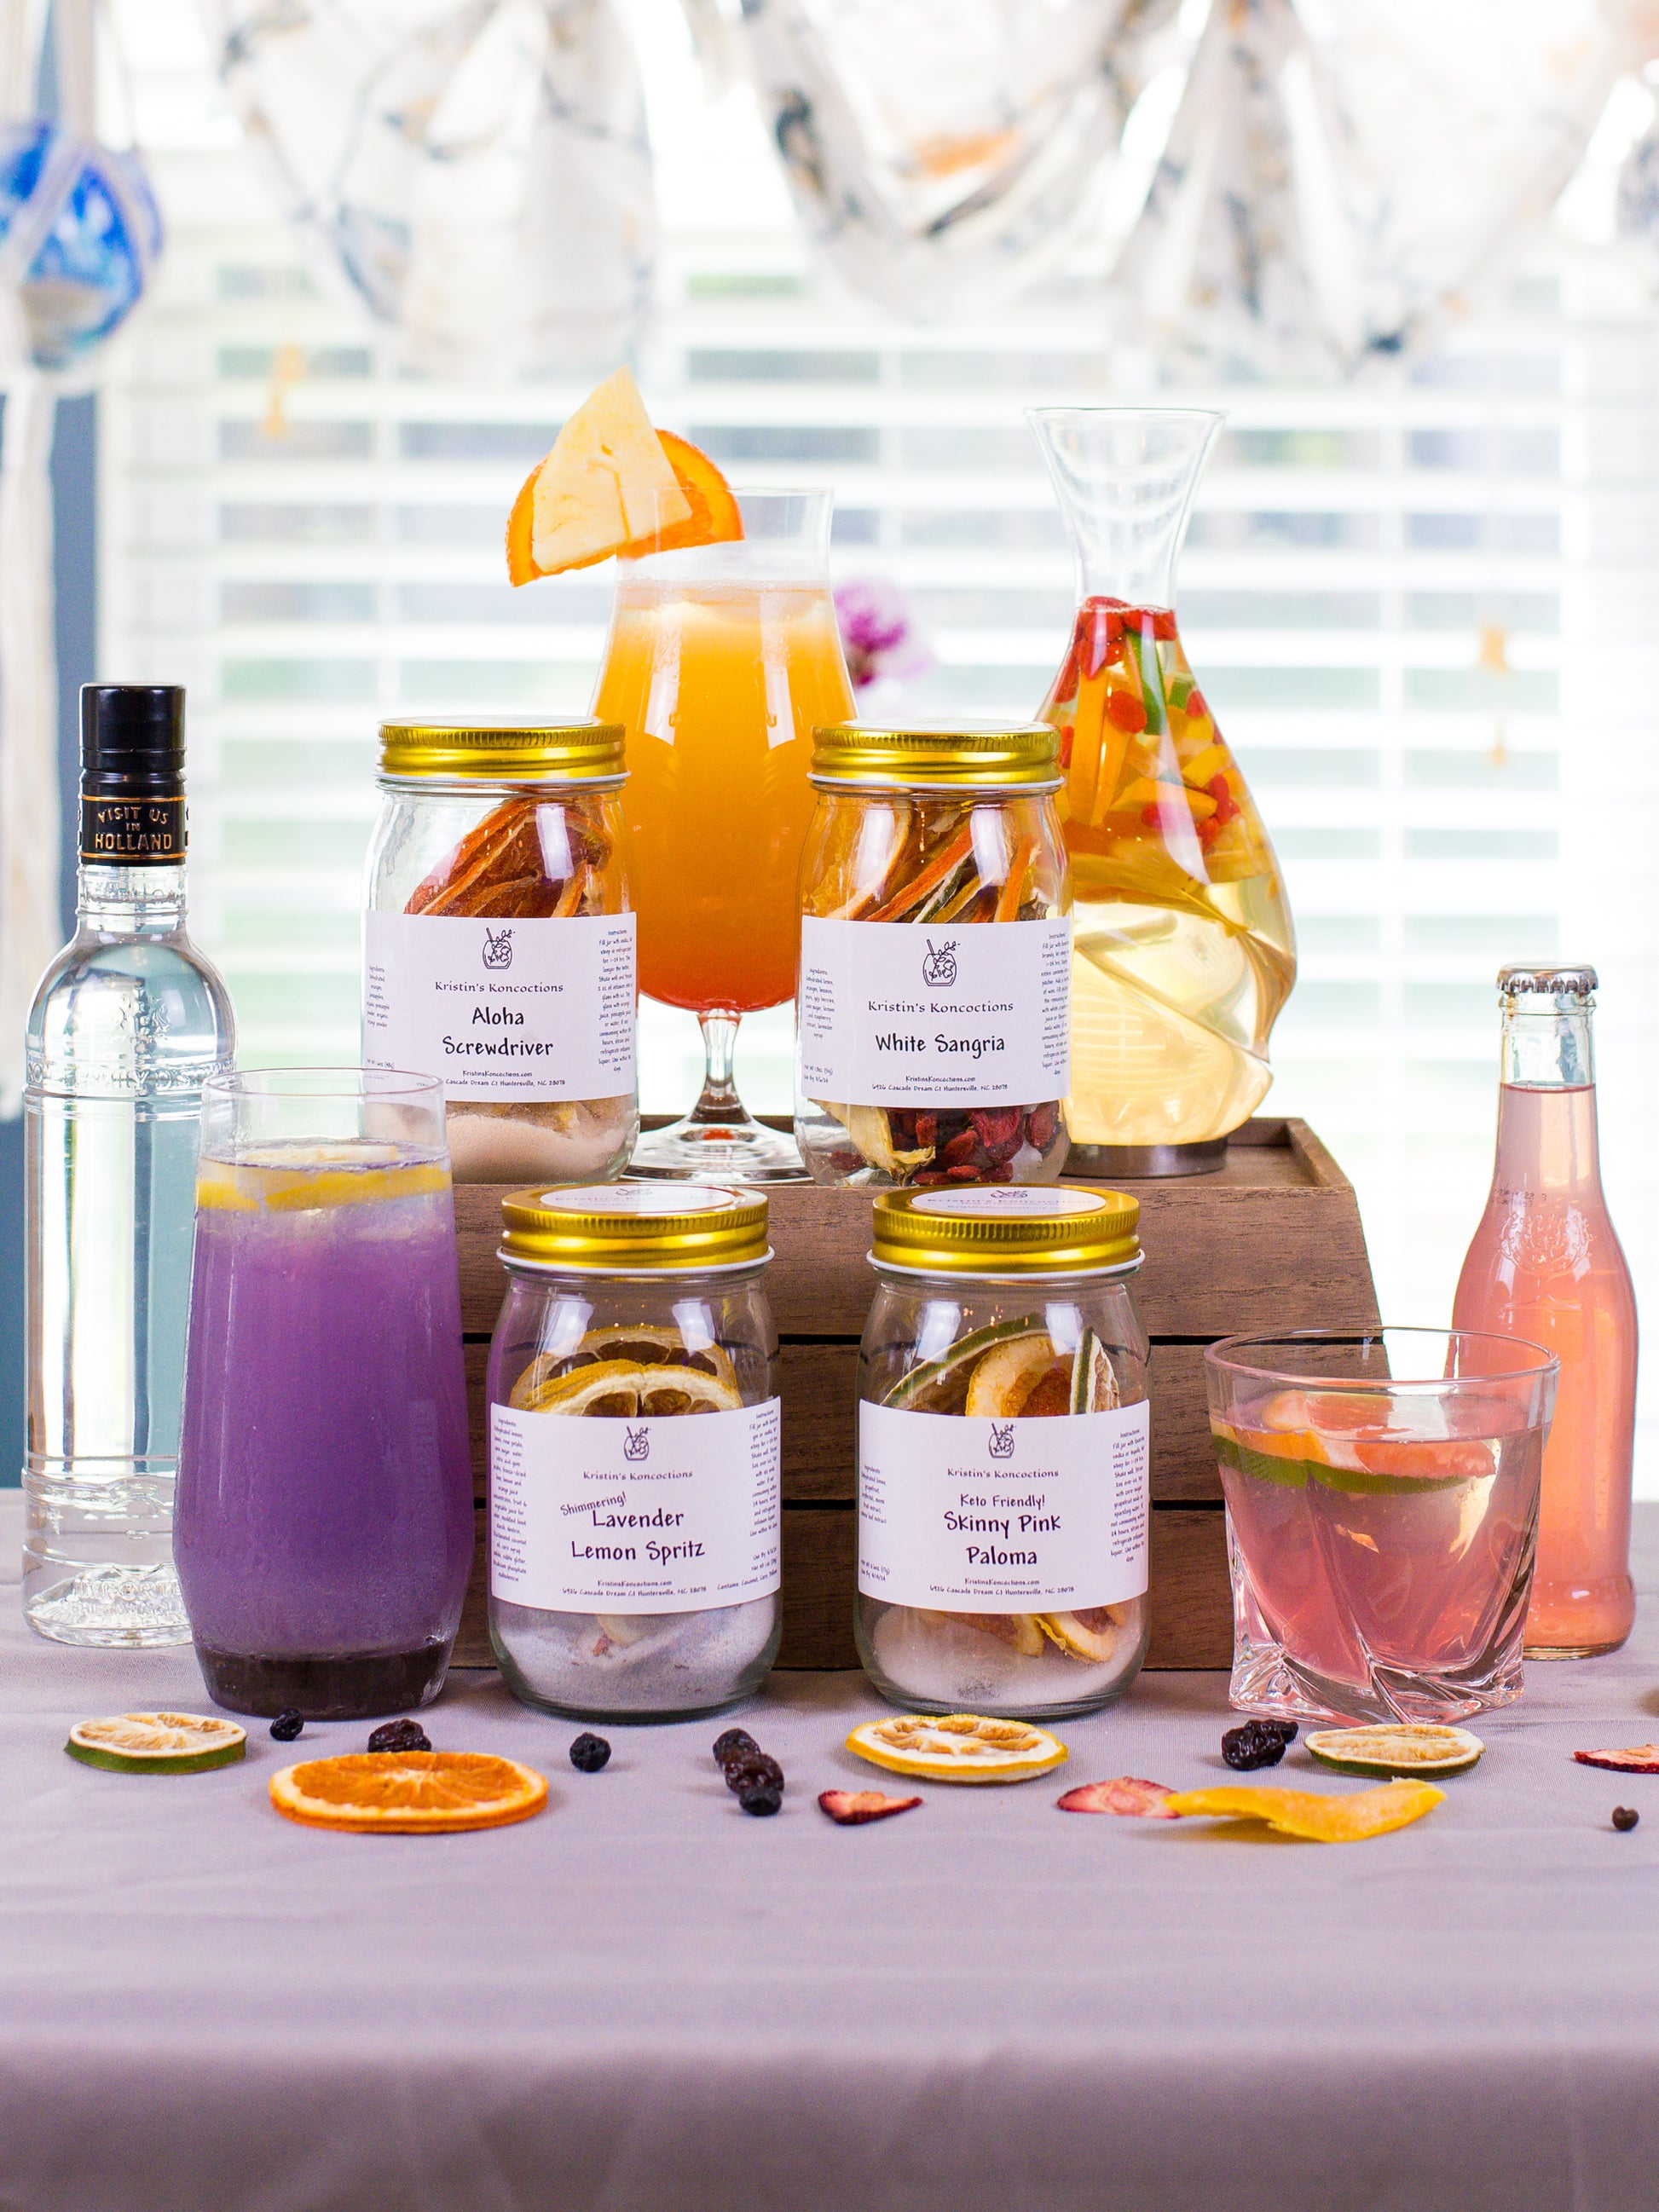 DIY Mason Jar Cocktail Kits Your Guests Will Adore - Zola Expert Wedding  Advice